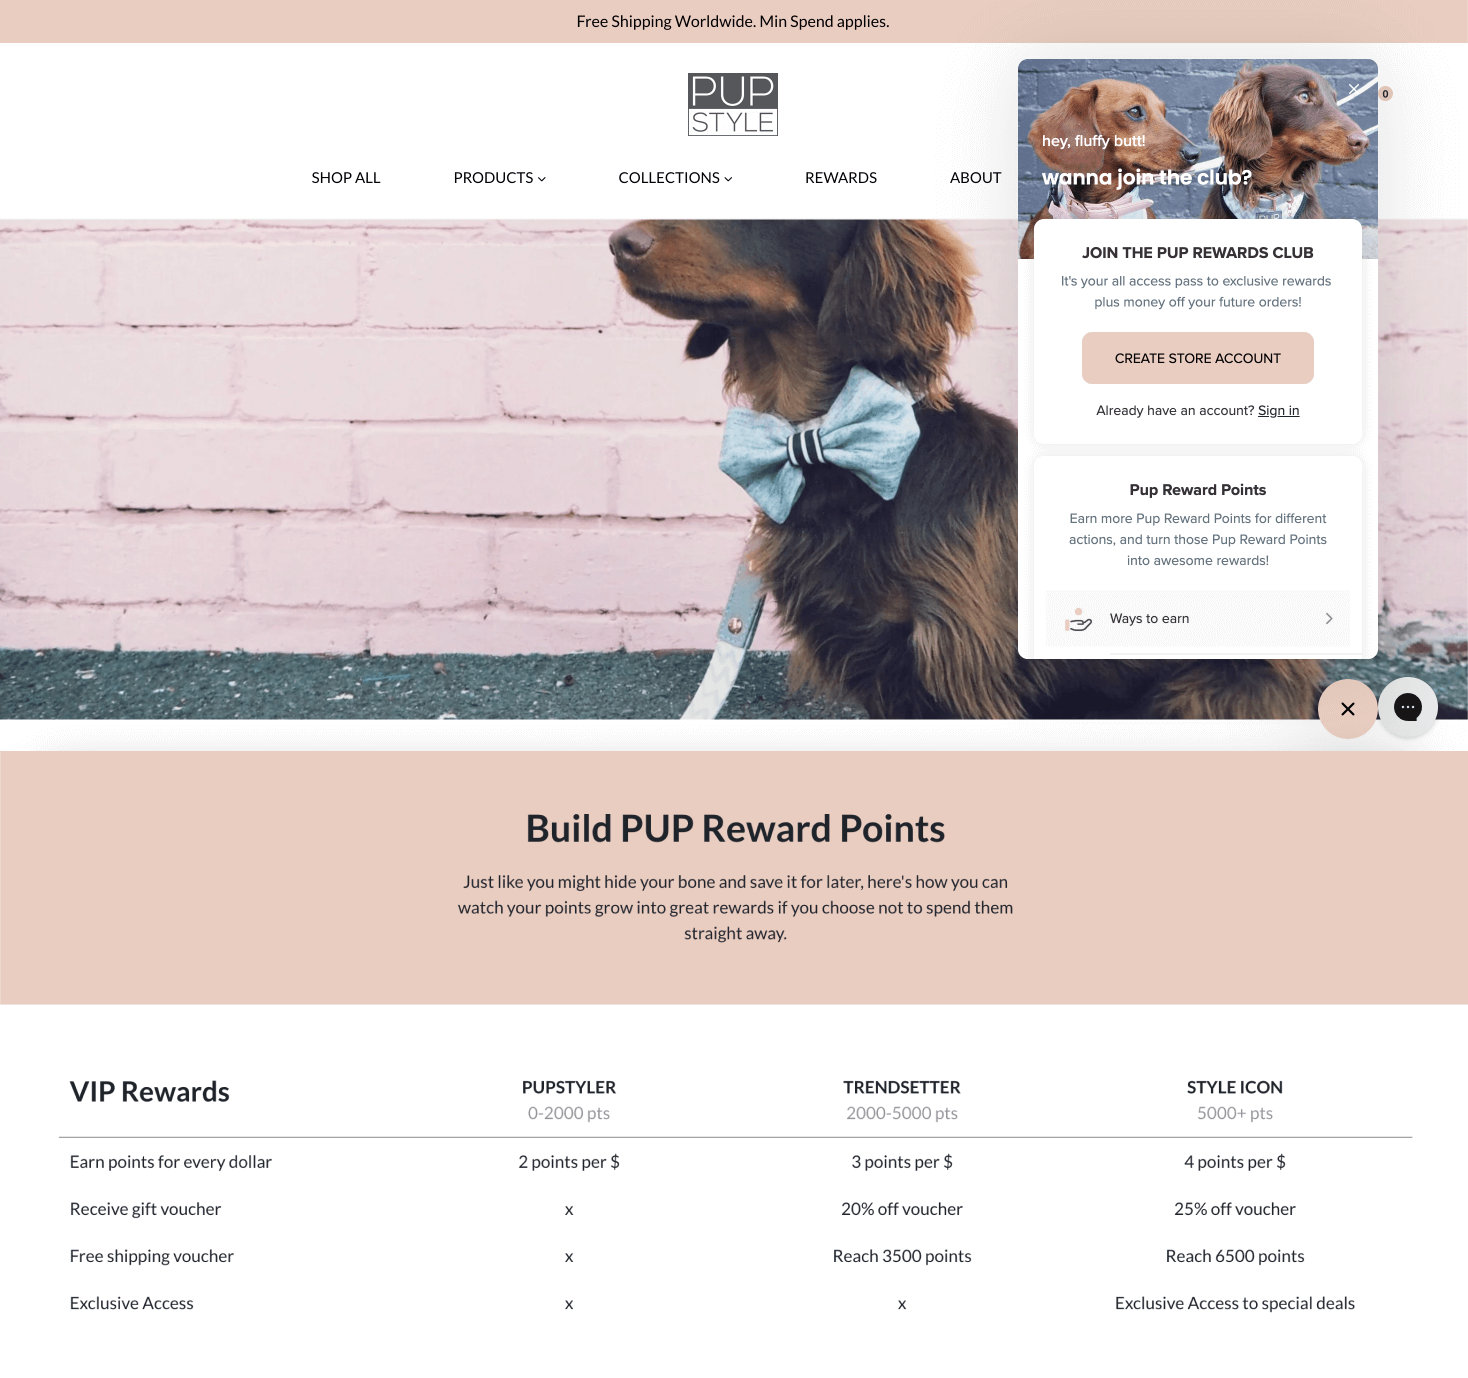 A screenshot of PUP Style’s rewards program explainer page showing its VIP tiers. There are three tiers: Pupstyler, Trendsetter, and Style Icon, and a chart showing the different benefits of each tier. 